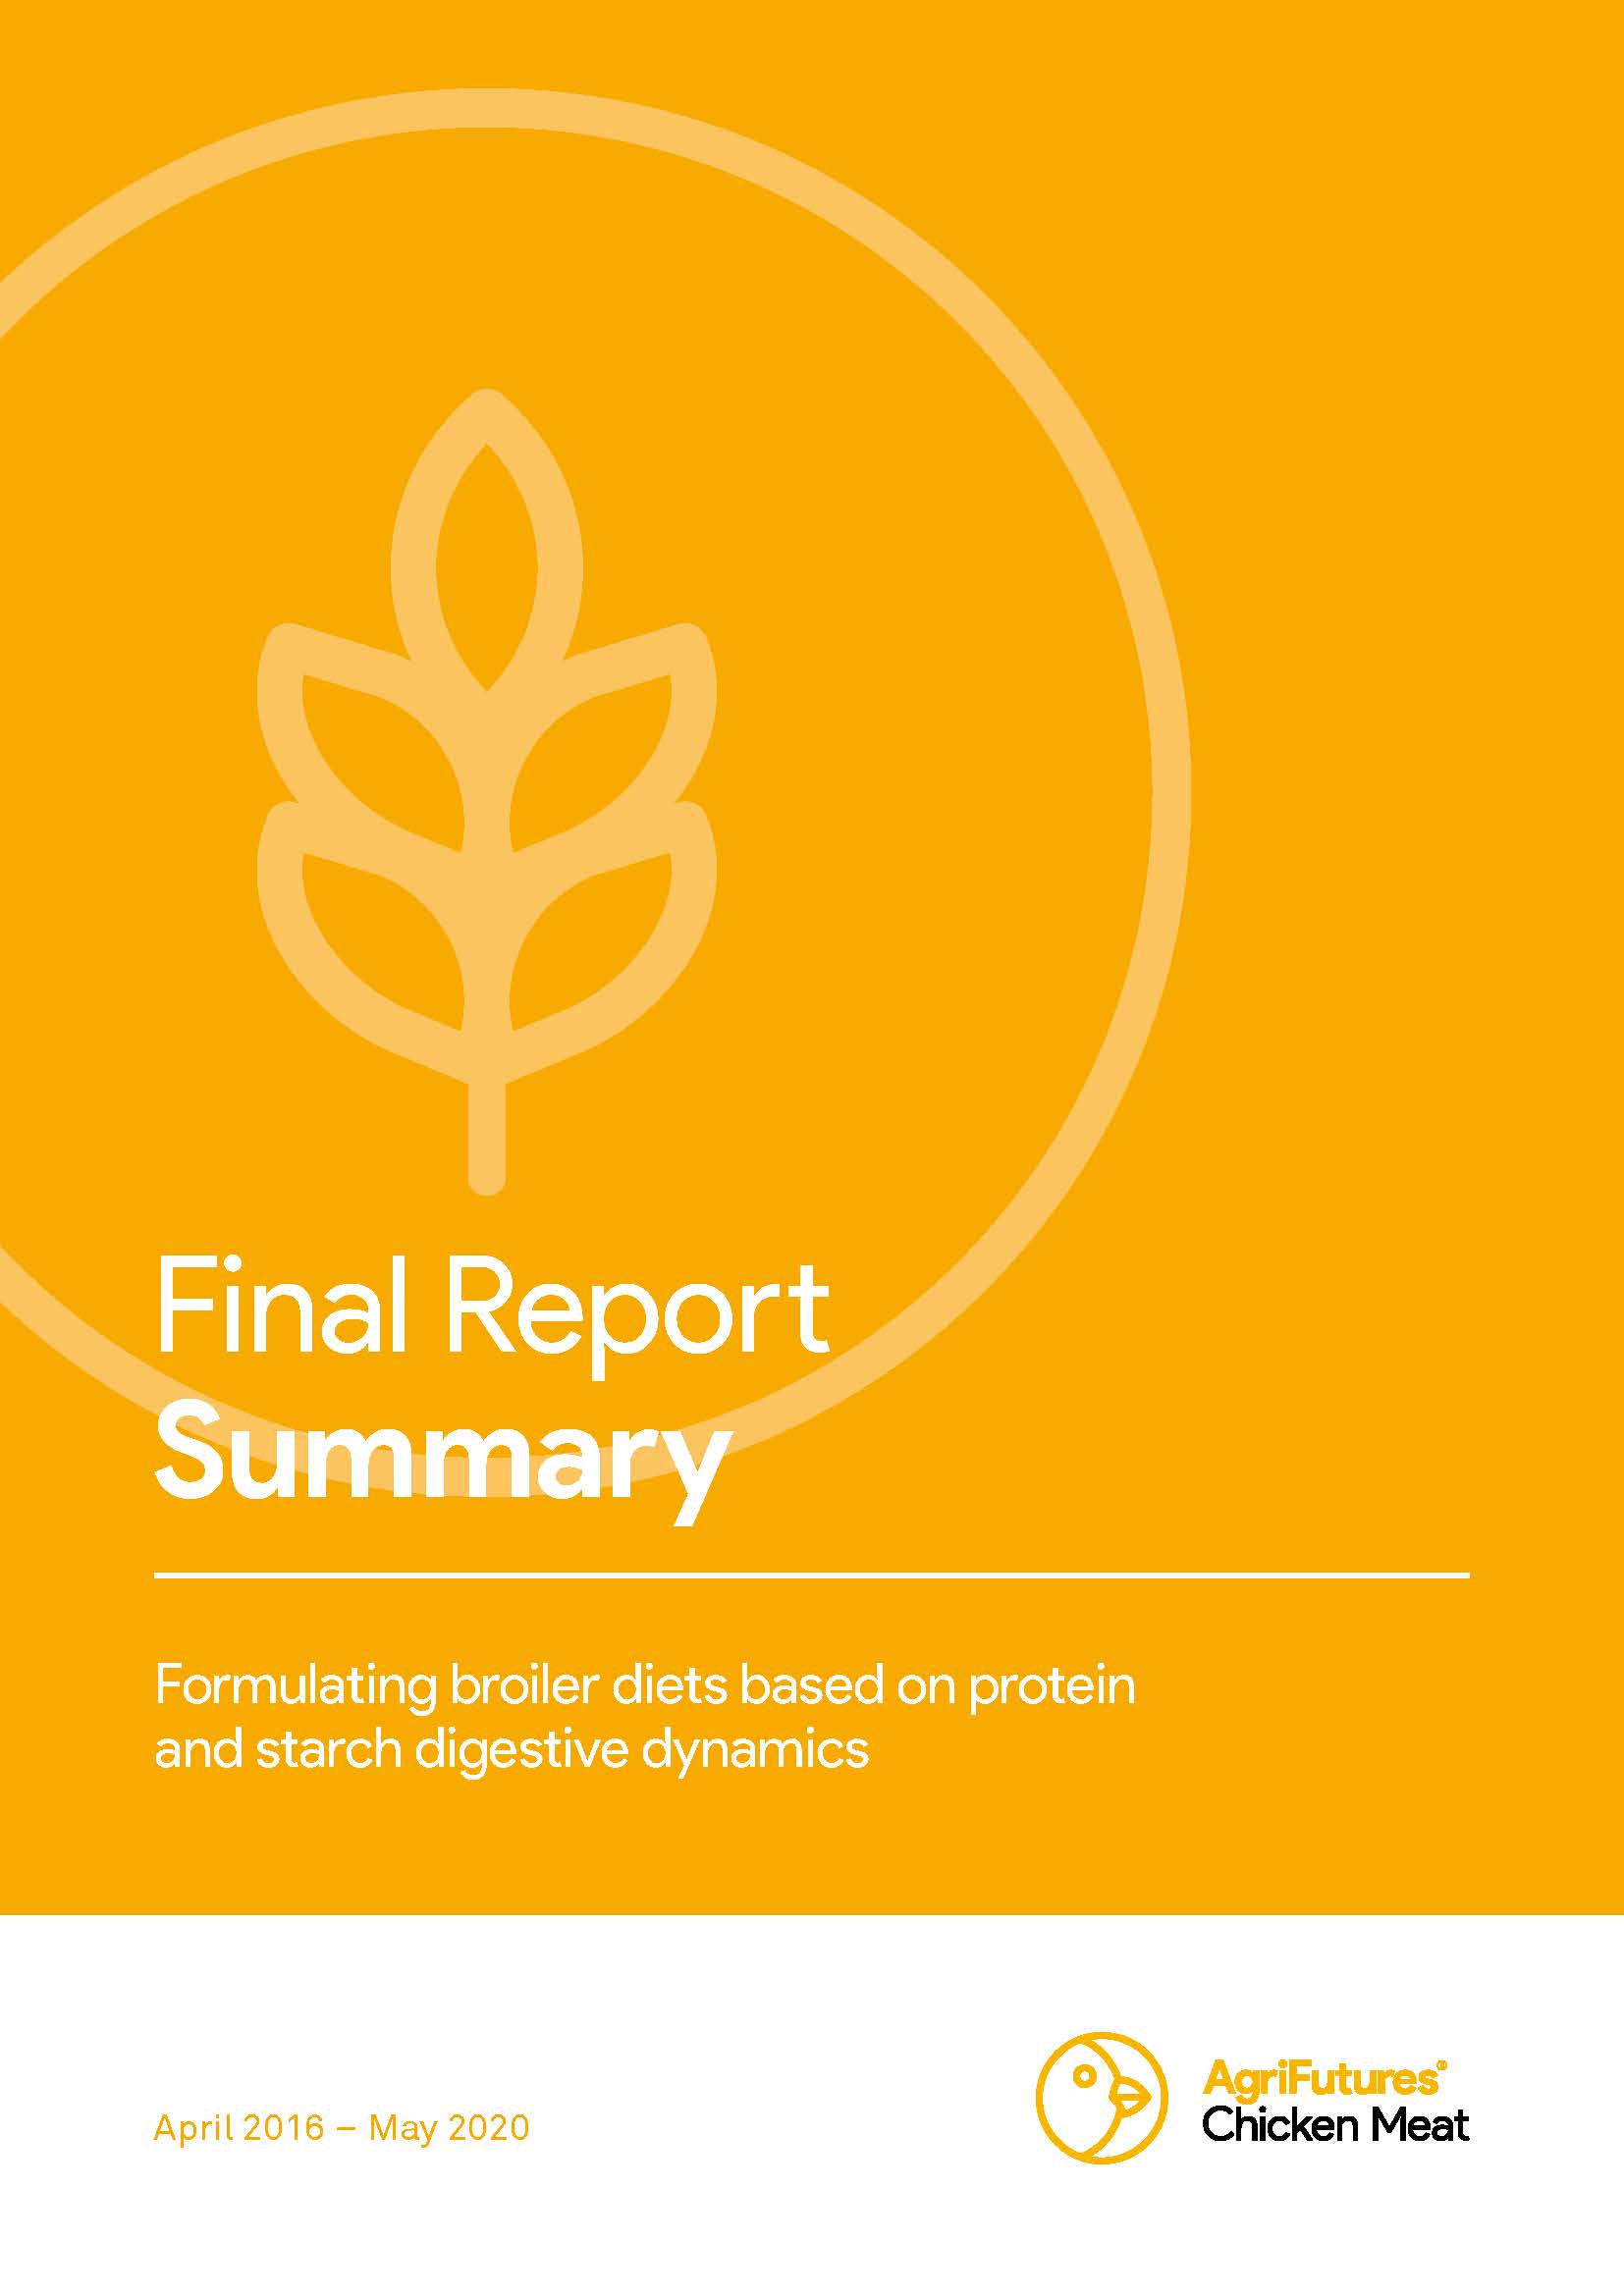 Final report summary: Formulating broiler diets based on protein and starch digestive dynamics - image